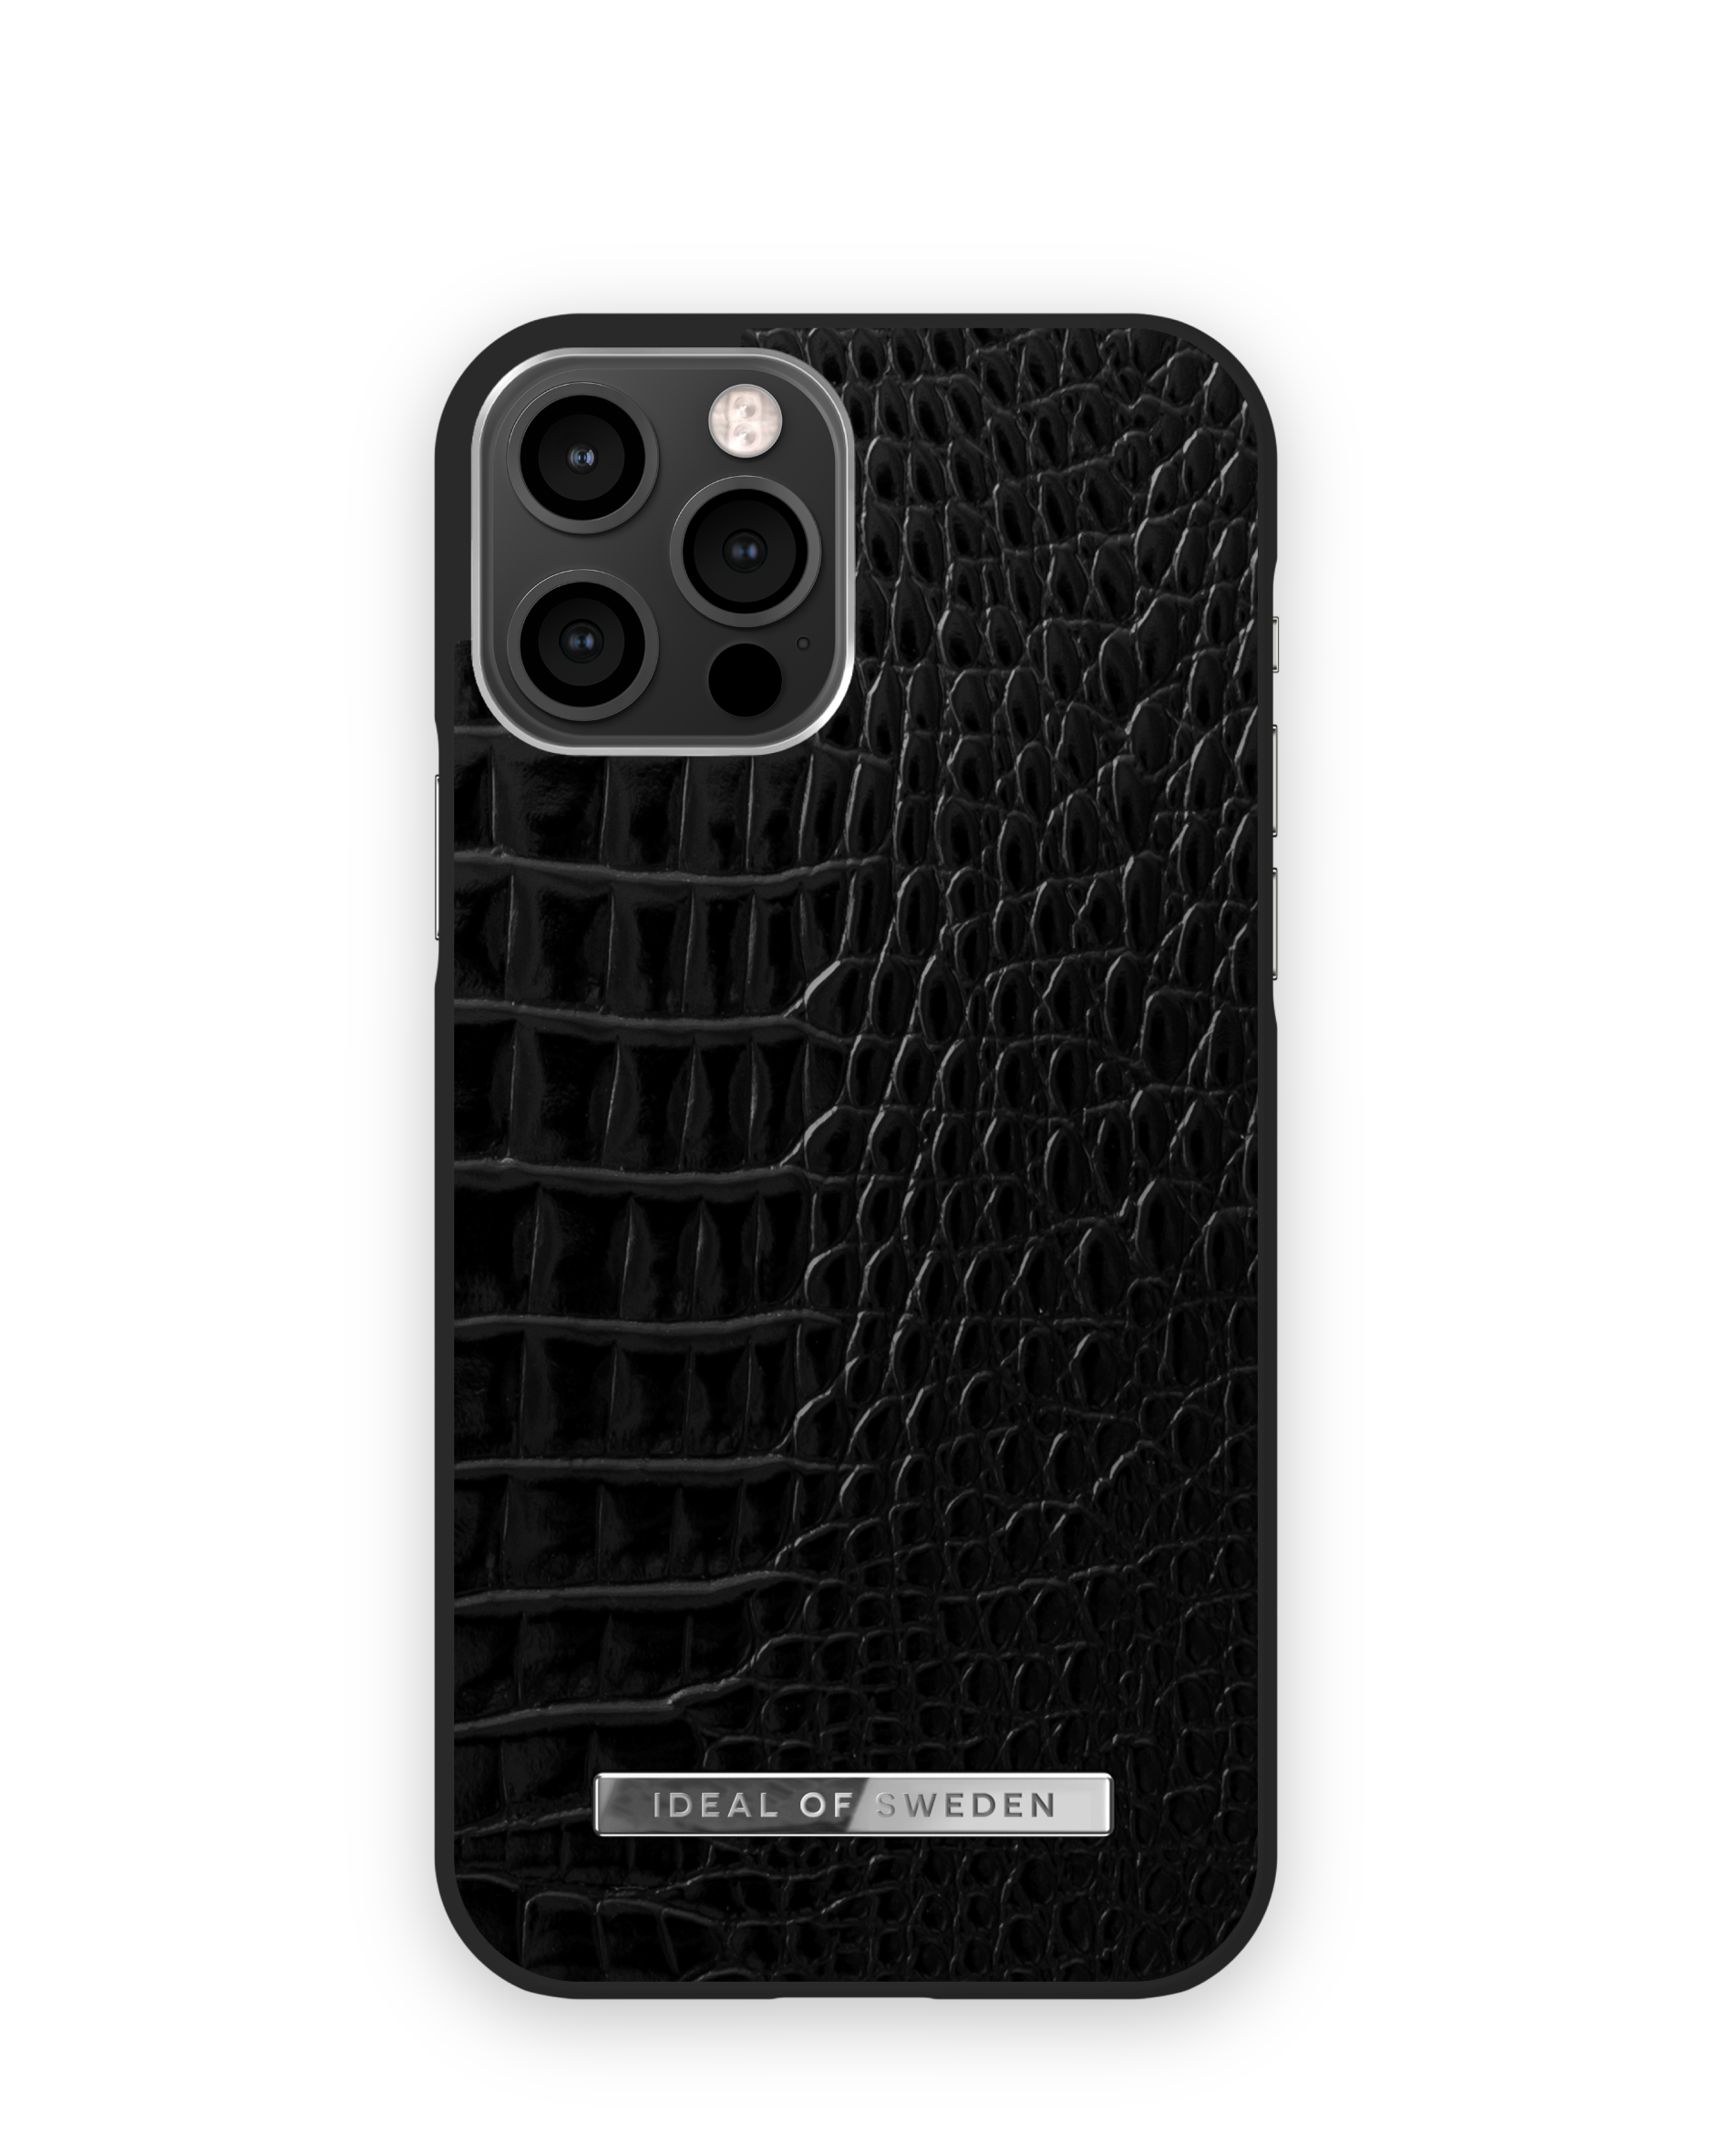 IDEAL OF SWEDEN IDACSS21-I2061-306, Apple, Croco Backcover, Silver iPhone Apple Noir iPhone 12, Pro, 12 Apple Neo